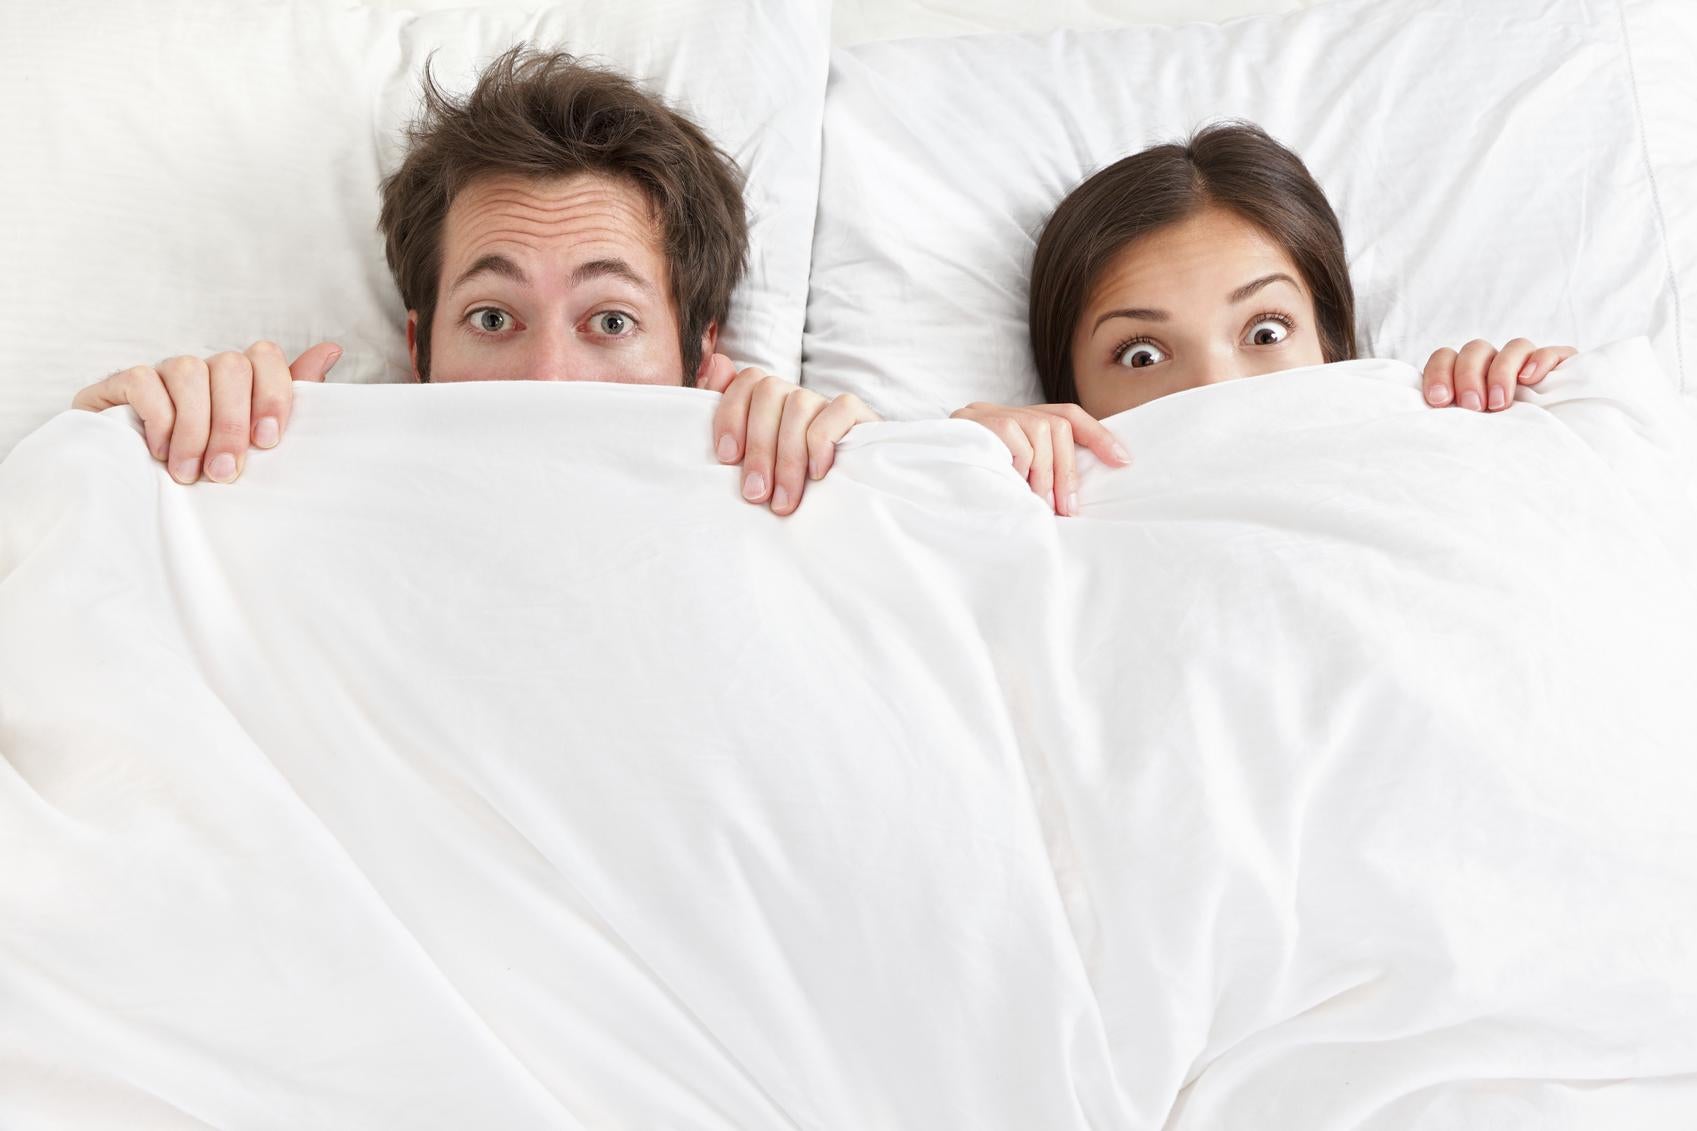 Sharing your bed with someone could be bad for your health